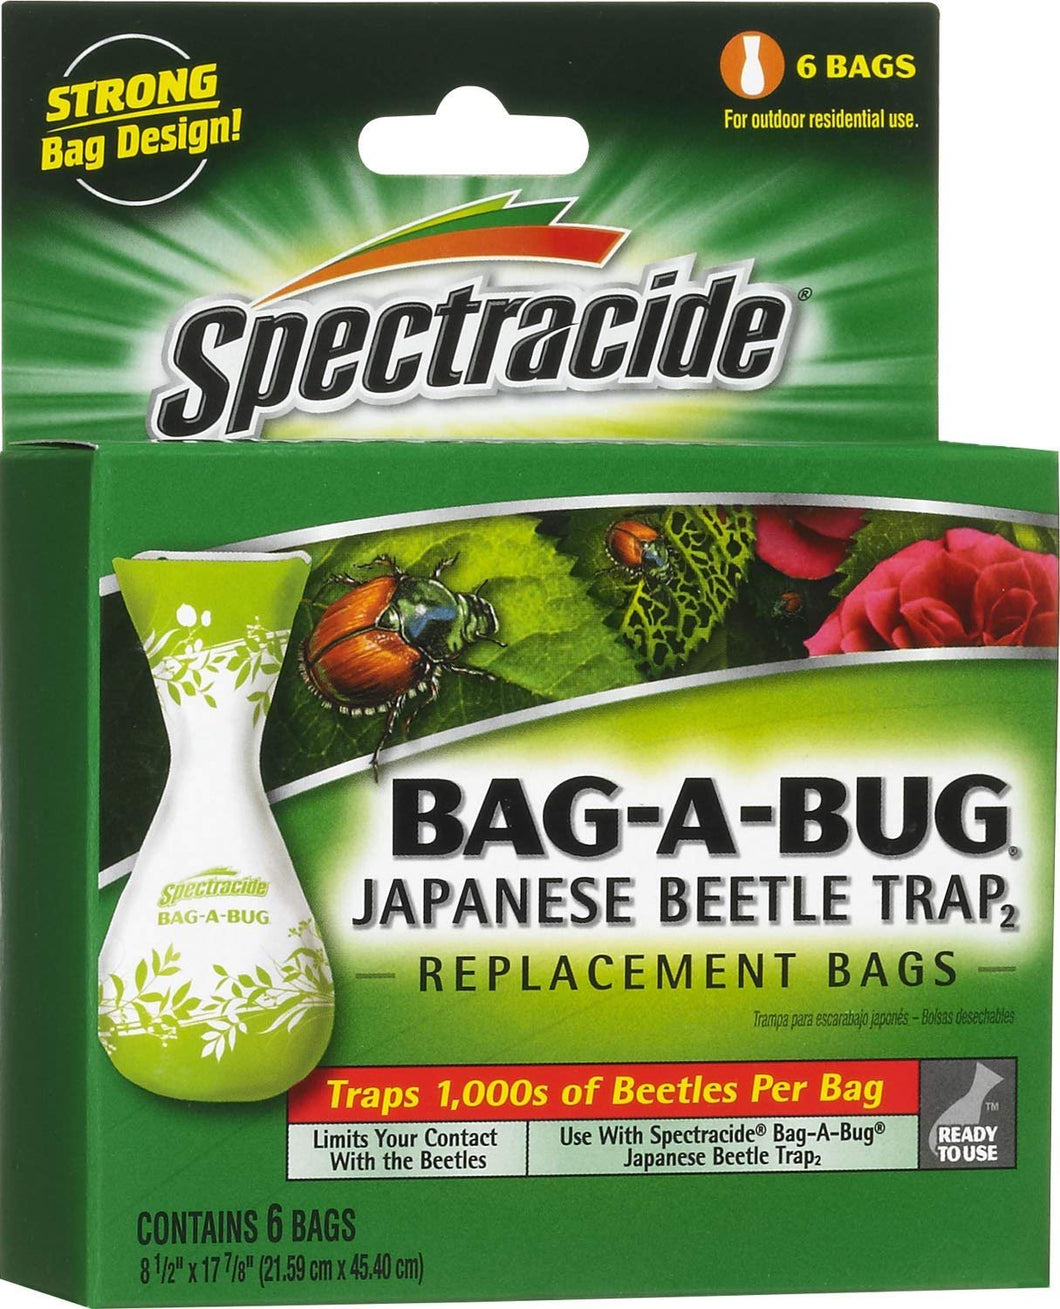 Spectracide Bag-A-Bug Japanese Beetle Trap2, Replacement Bags, 6-Count